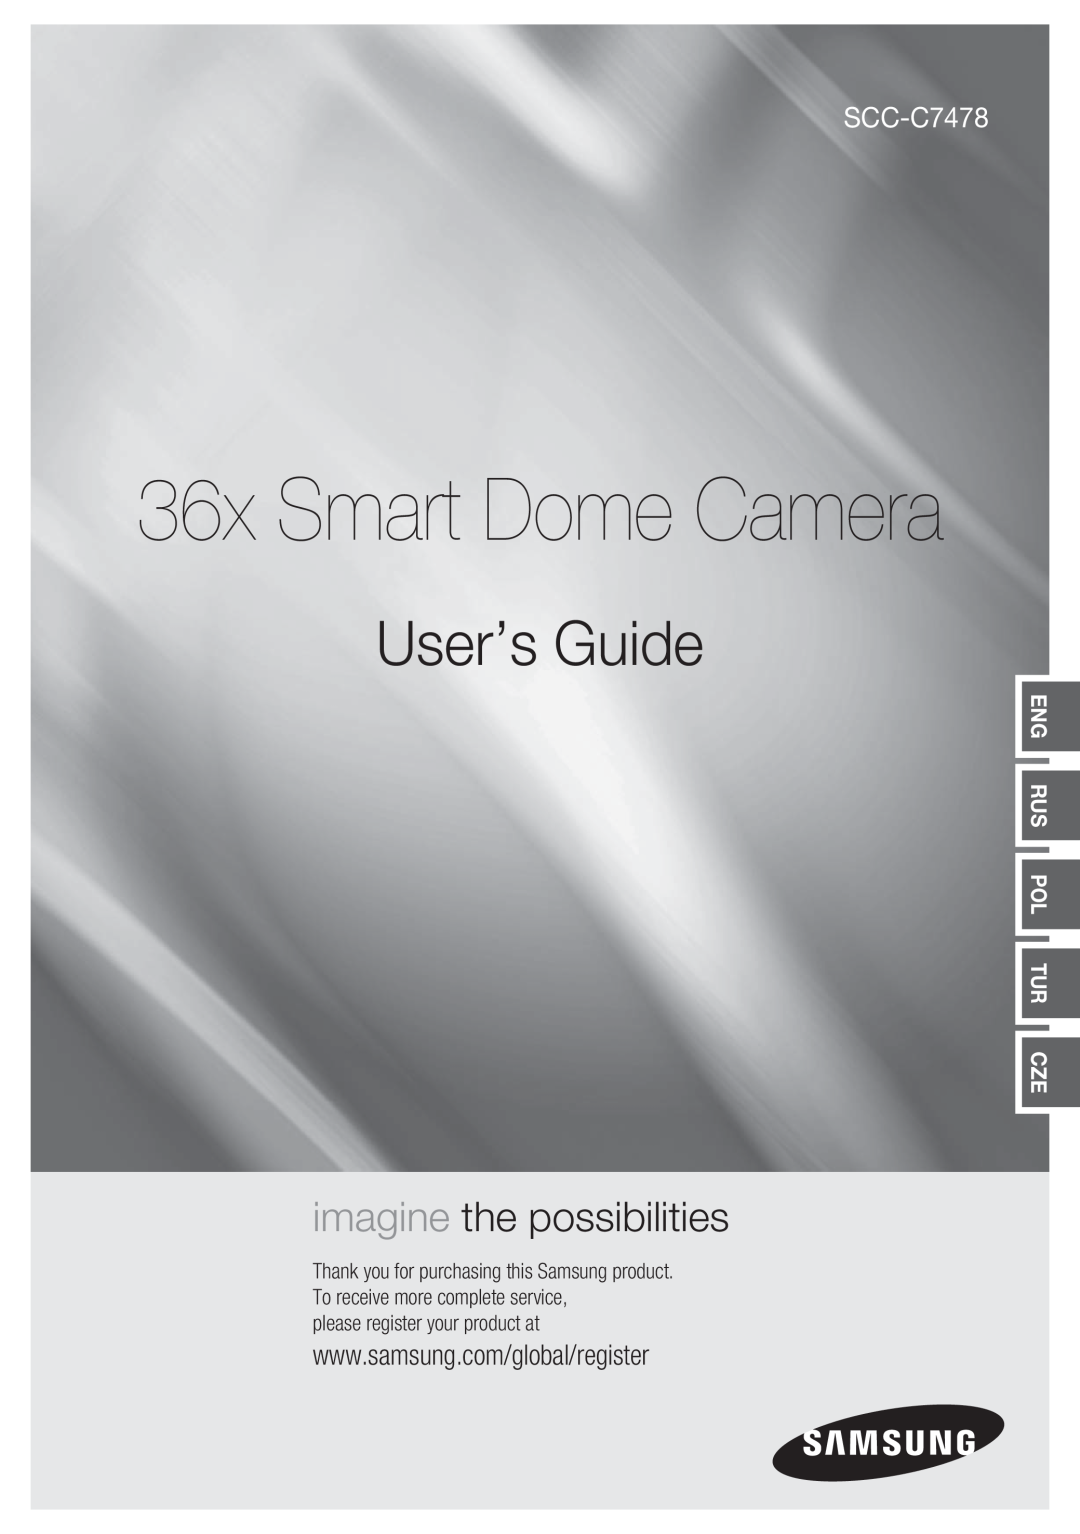 Samsung SCC-C7478P manual 36x Smart Dome Camera, User’s Guide, please register your product at, imagine the possibilities 